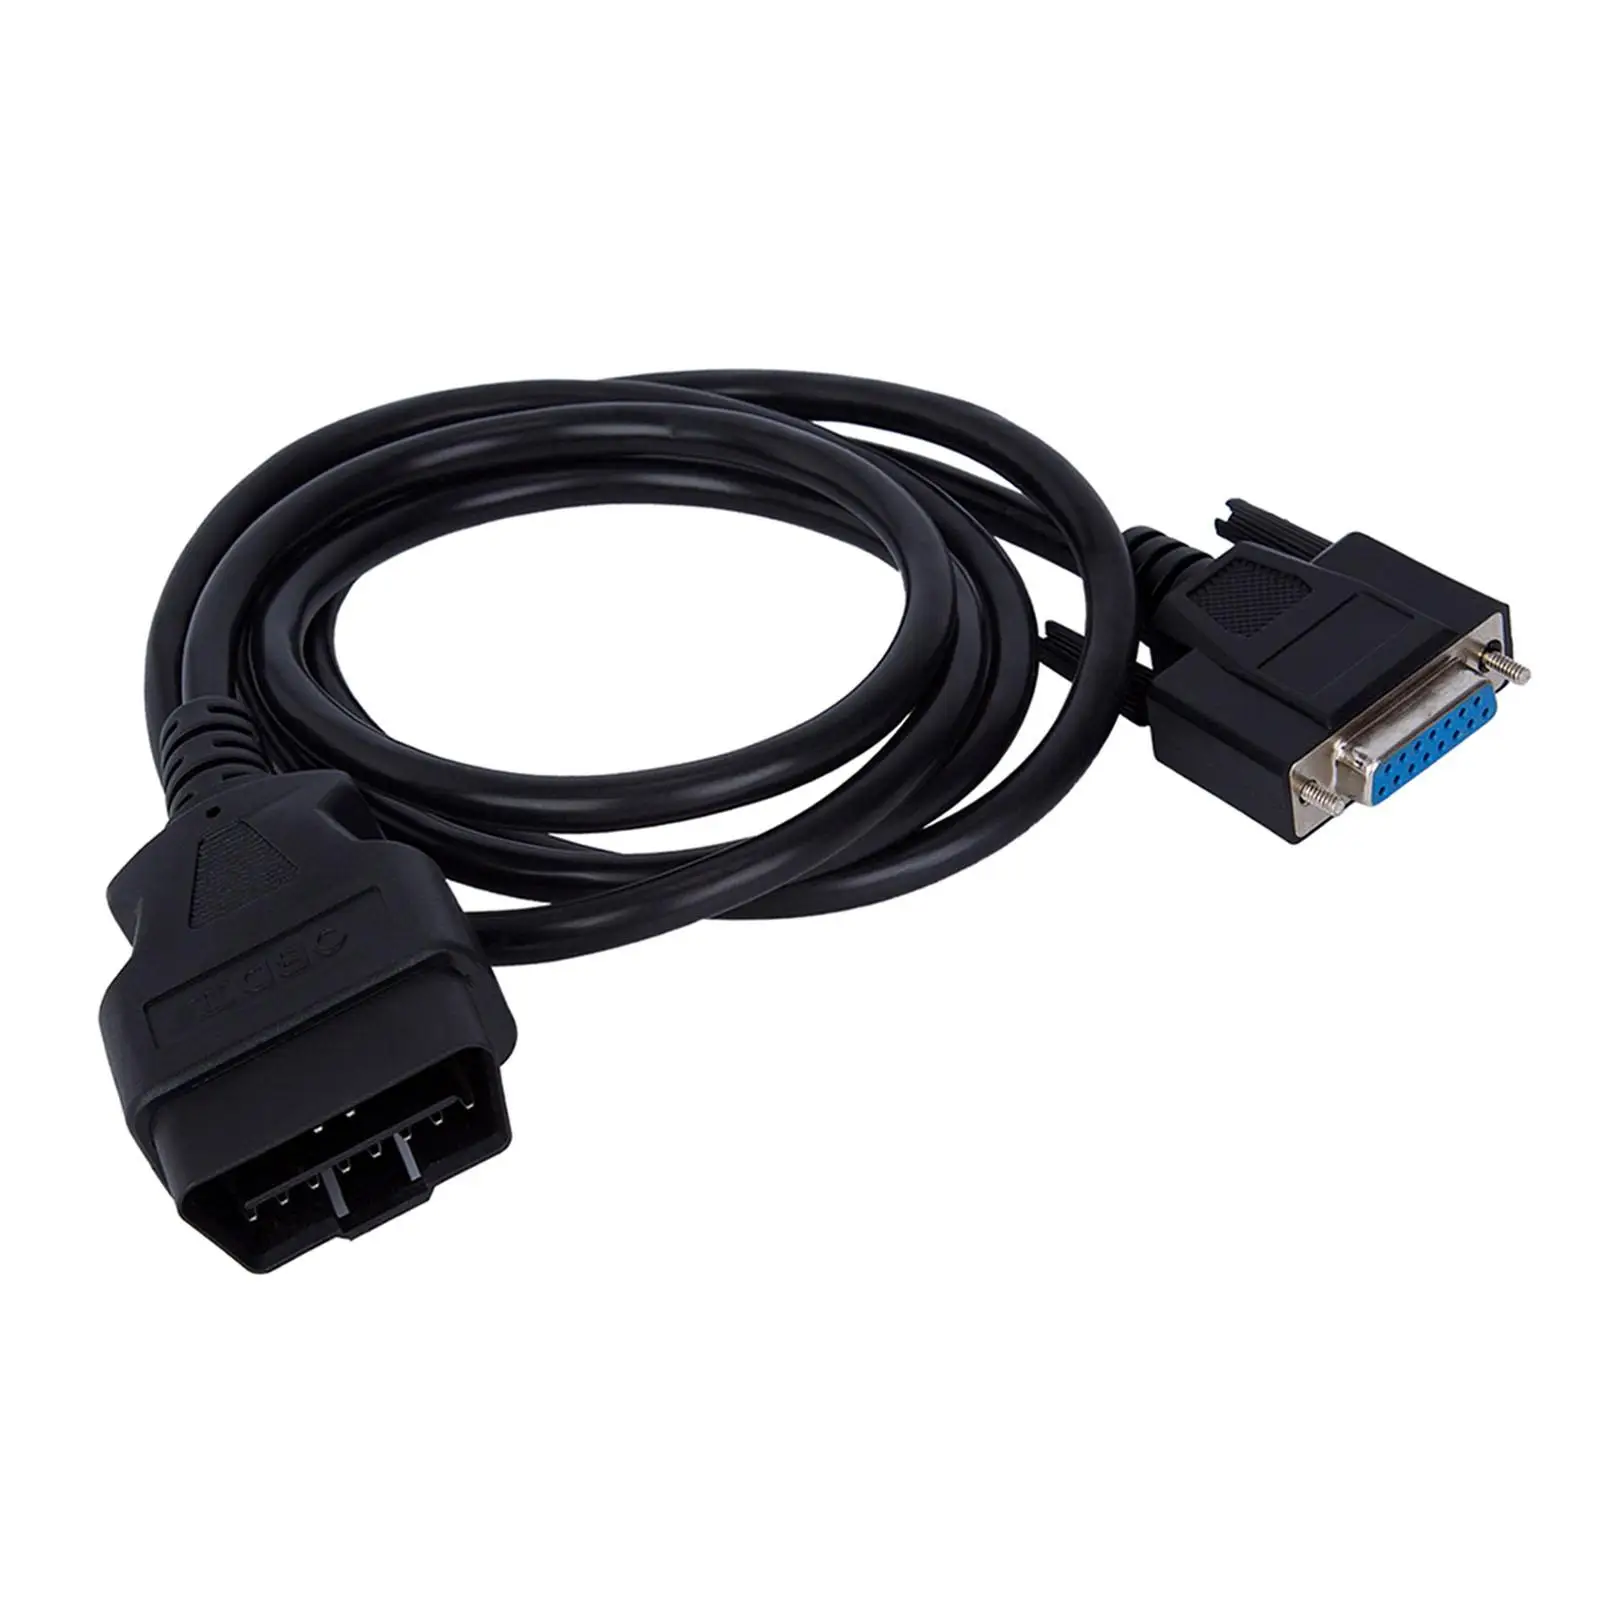 1.55M OBD II OBD2 16 Pin Male to Female Extension Cable OBD 2 to dB15 Male OBDII Cable Car Adapter Cable Connector Connection